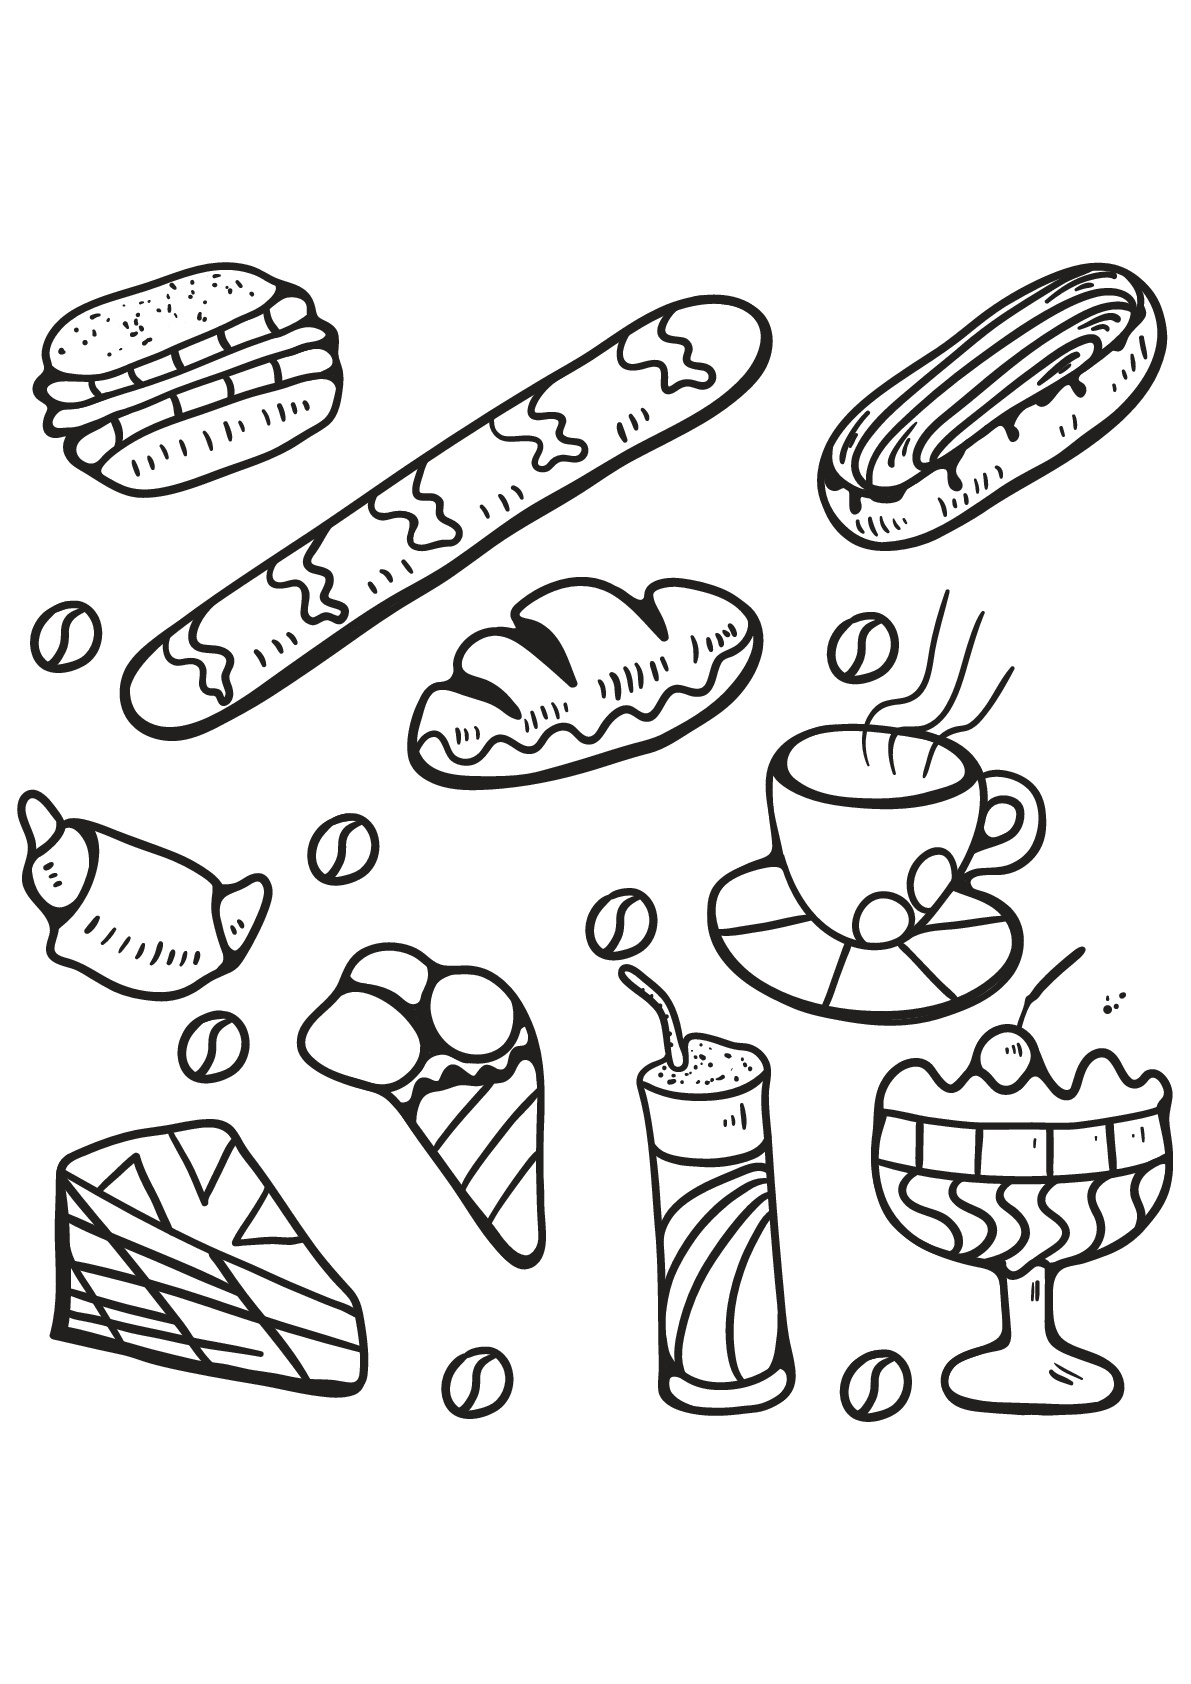 850 Coloring Pages For Adults Desserts For Free